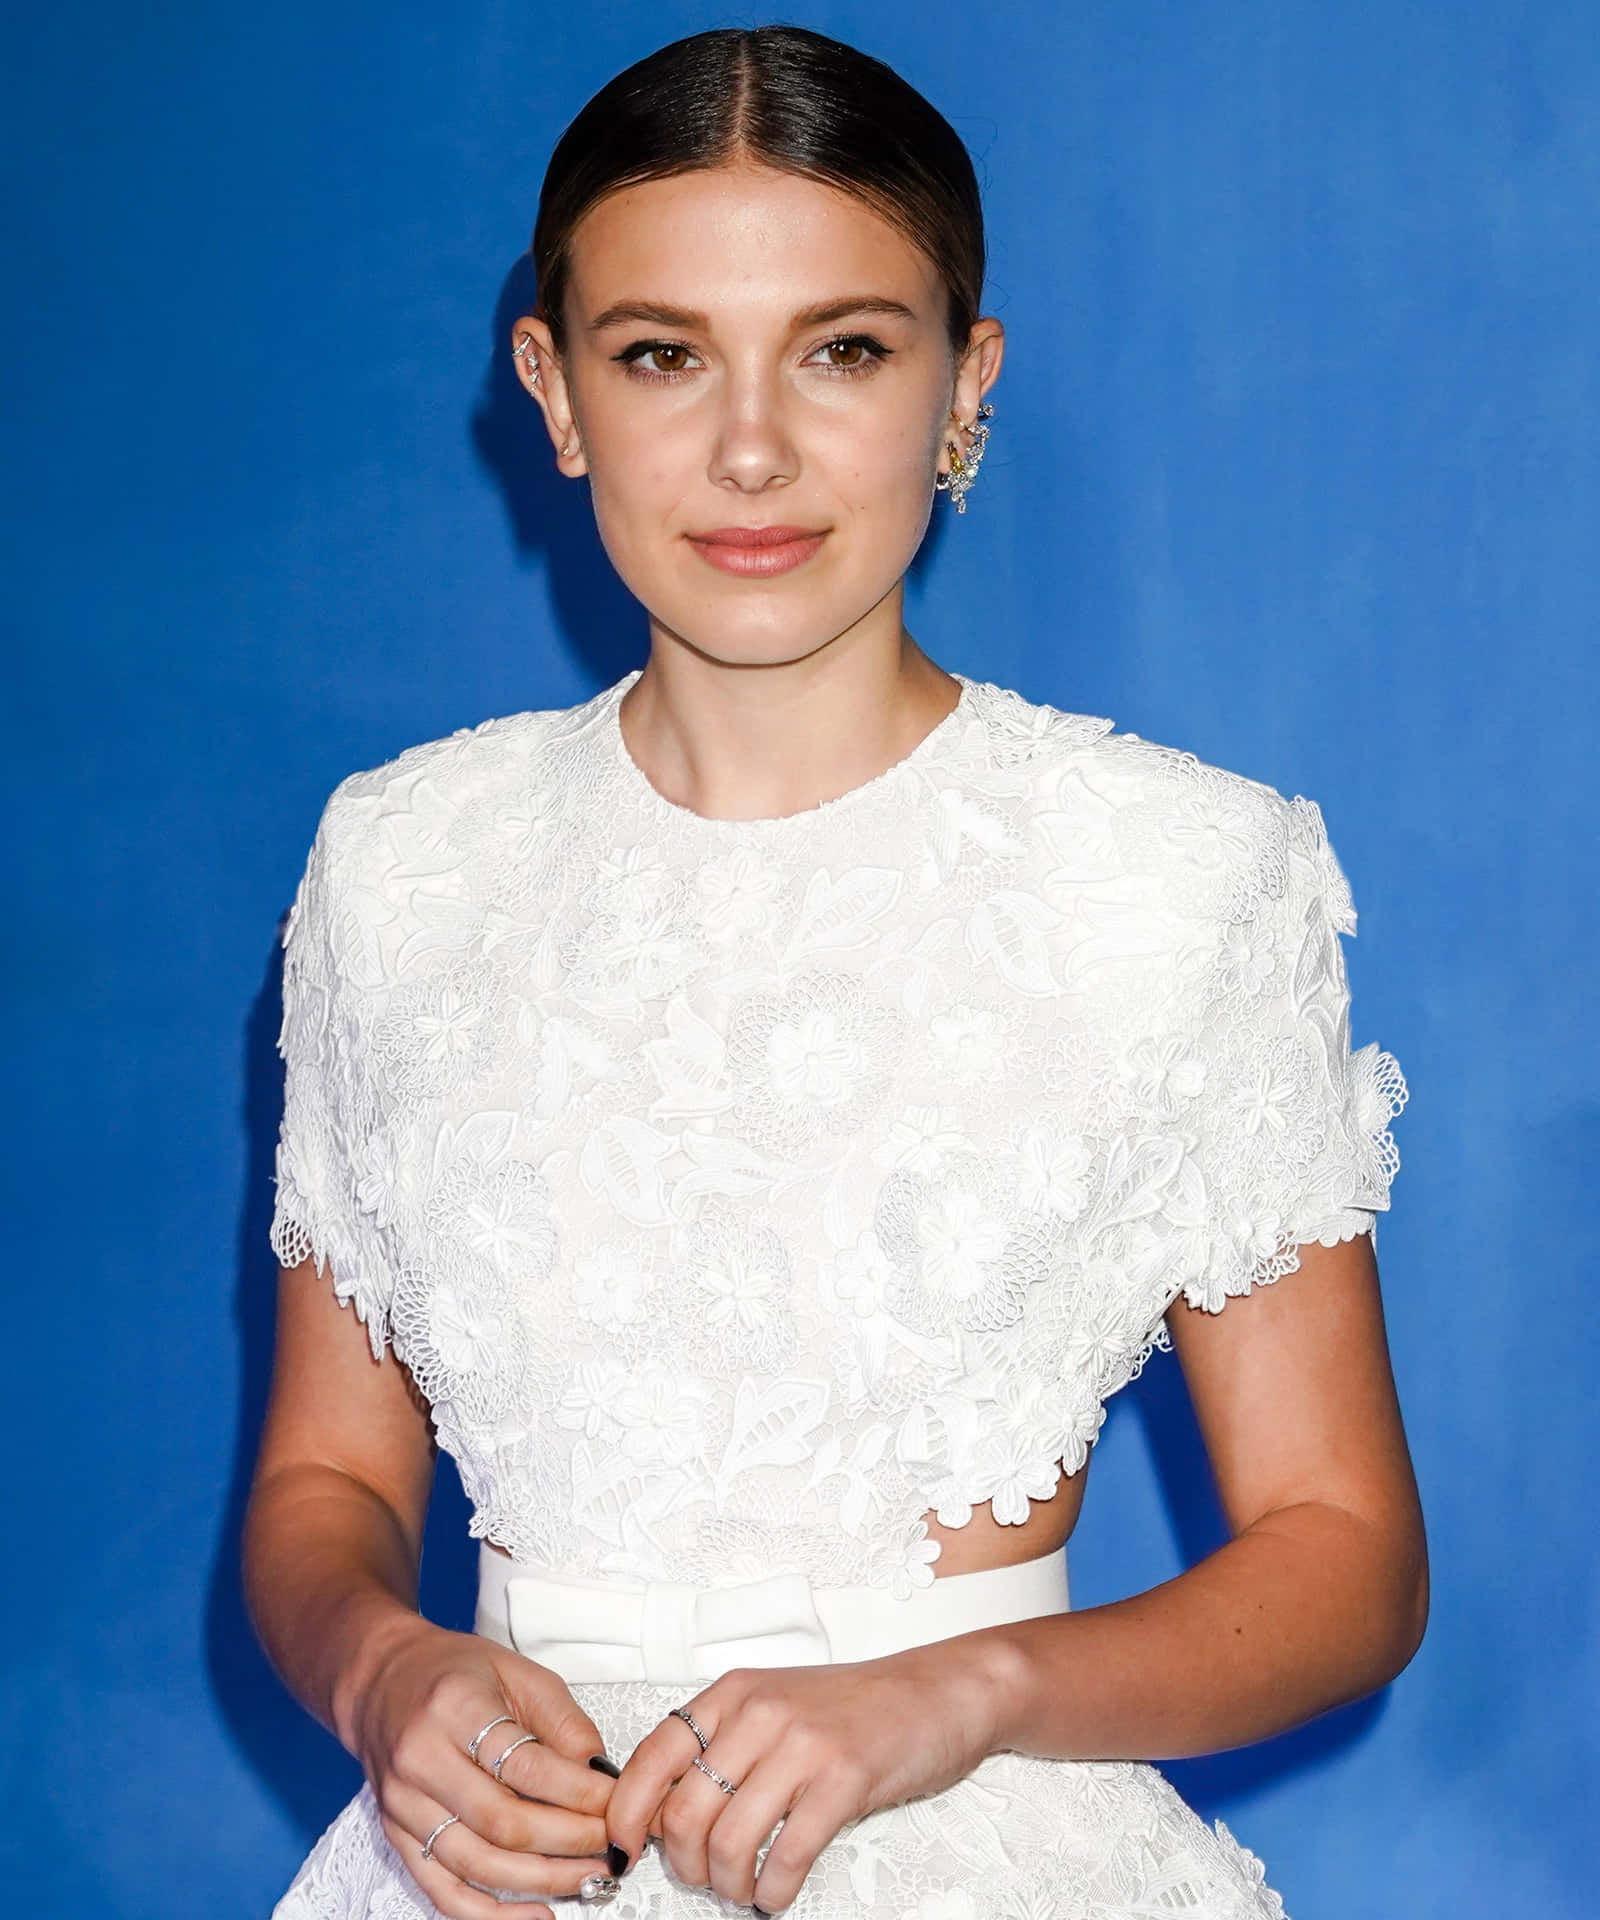 Actress Millie Bobby Brown looks stunning in her latest photoshoot